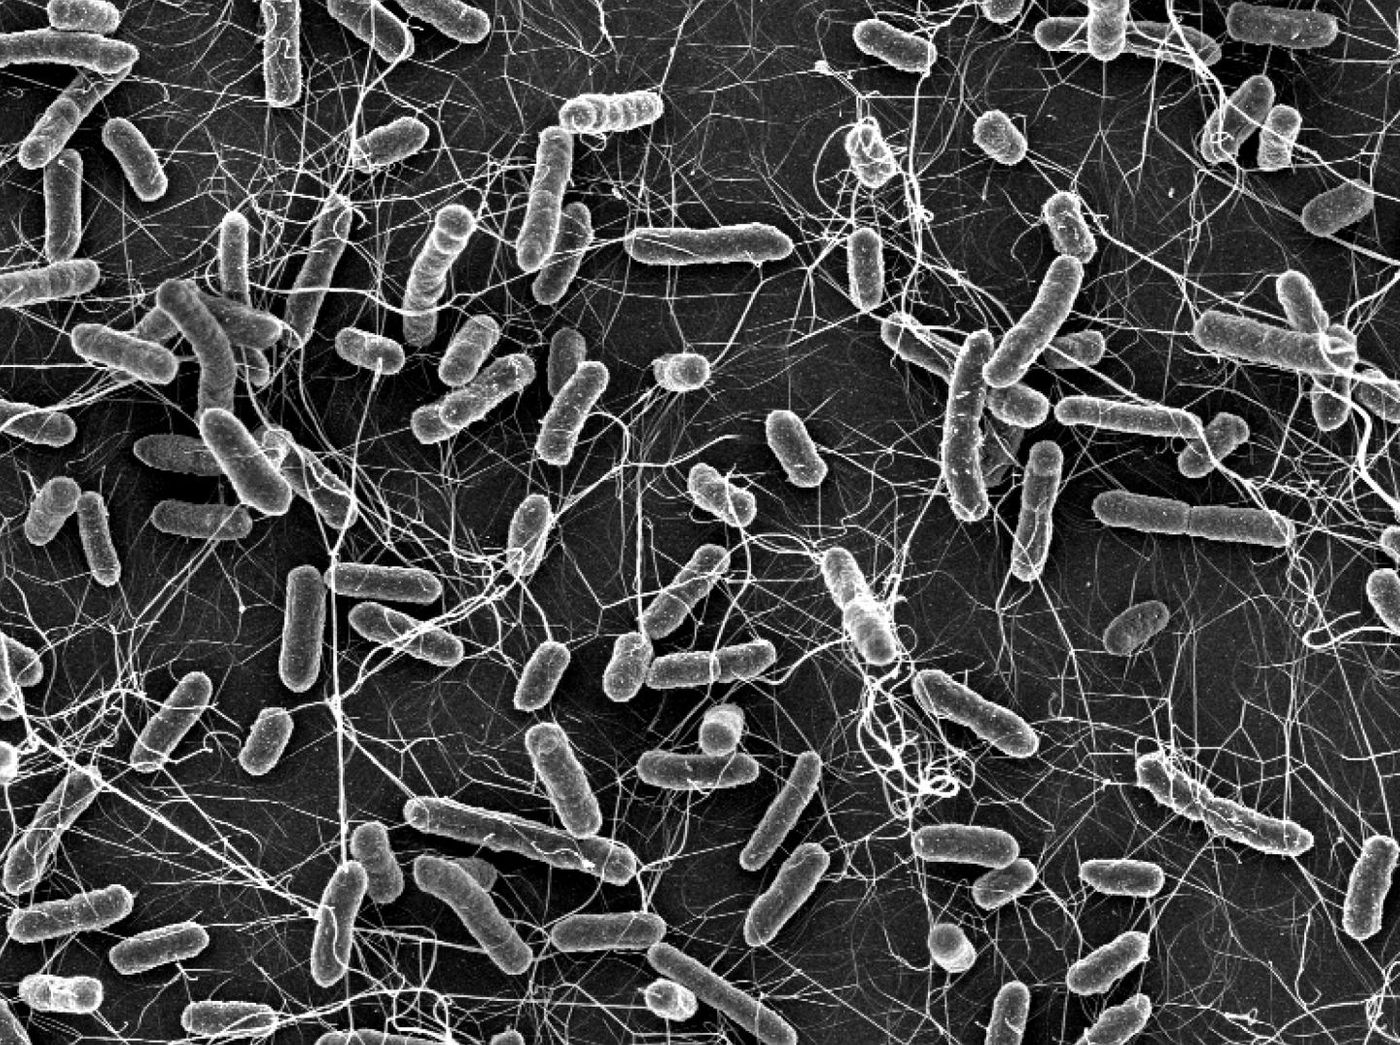 Salmonella causes diarrhoea in animals and humans. These bacteria become a particular public health concern if they are resistant to antibiotics (electron microscopic photograph). / Credit: ETH Zurich / Stefan Fattinger